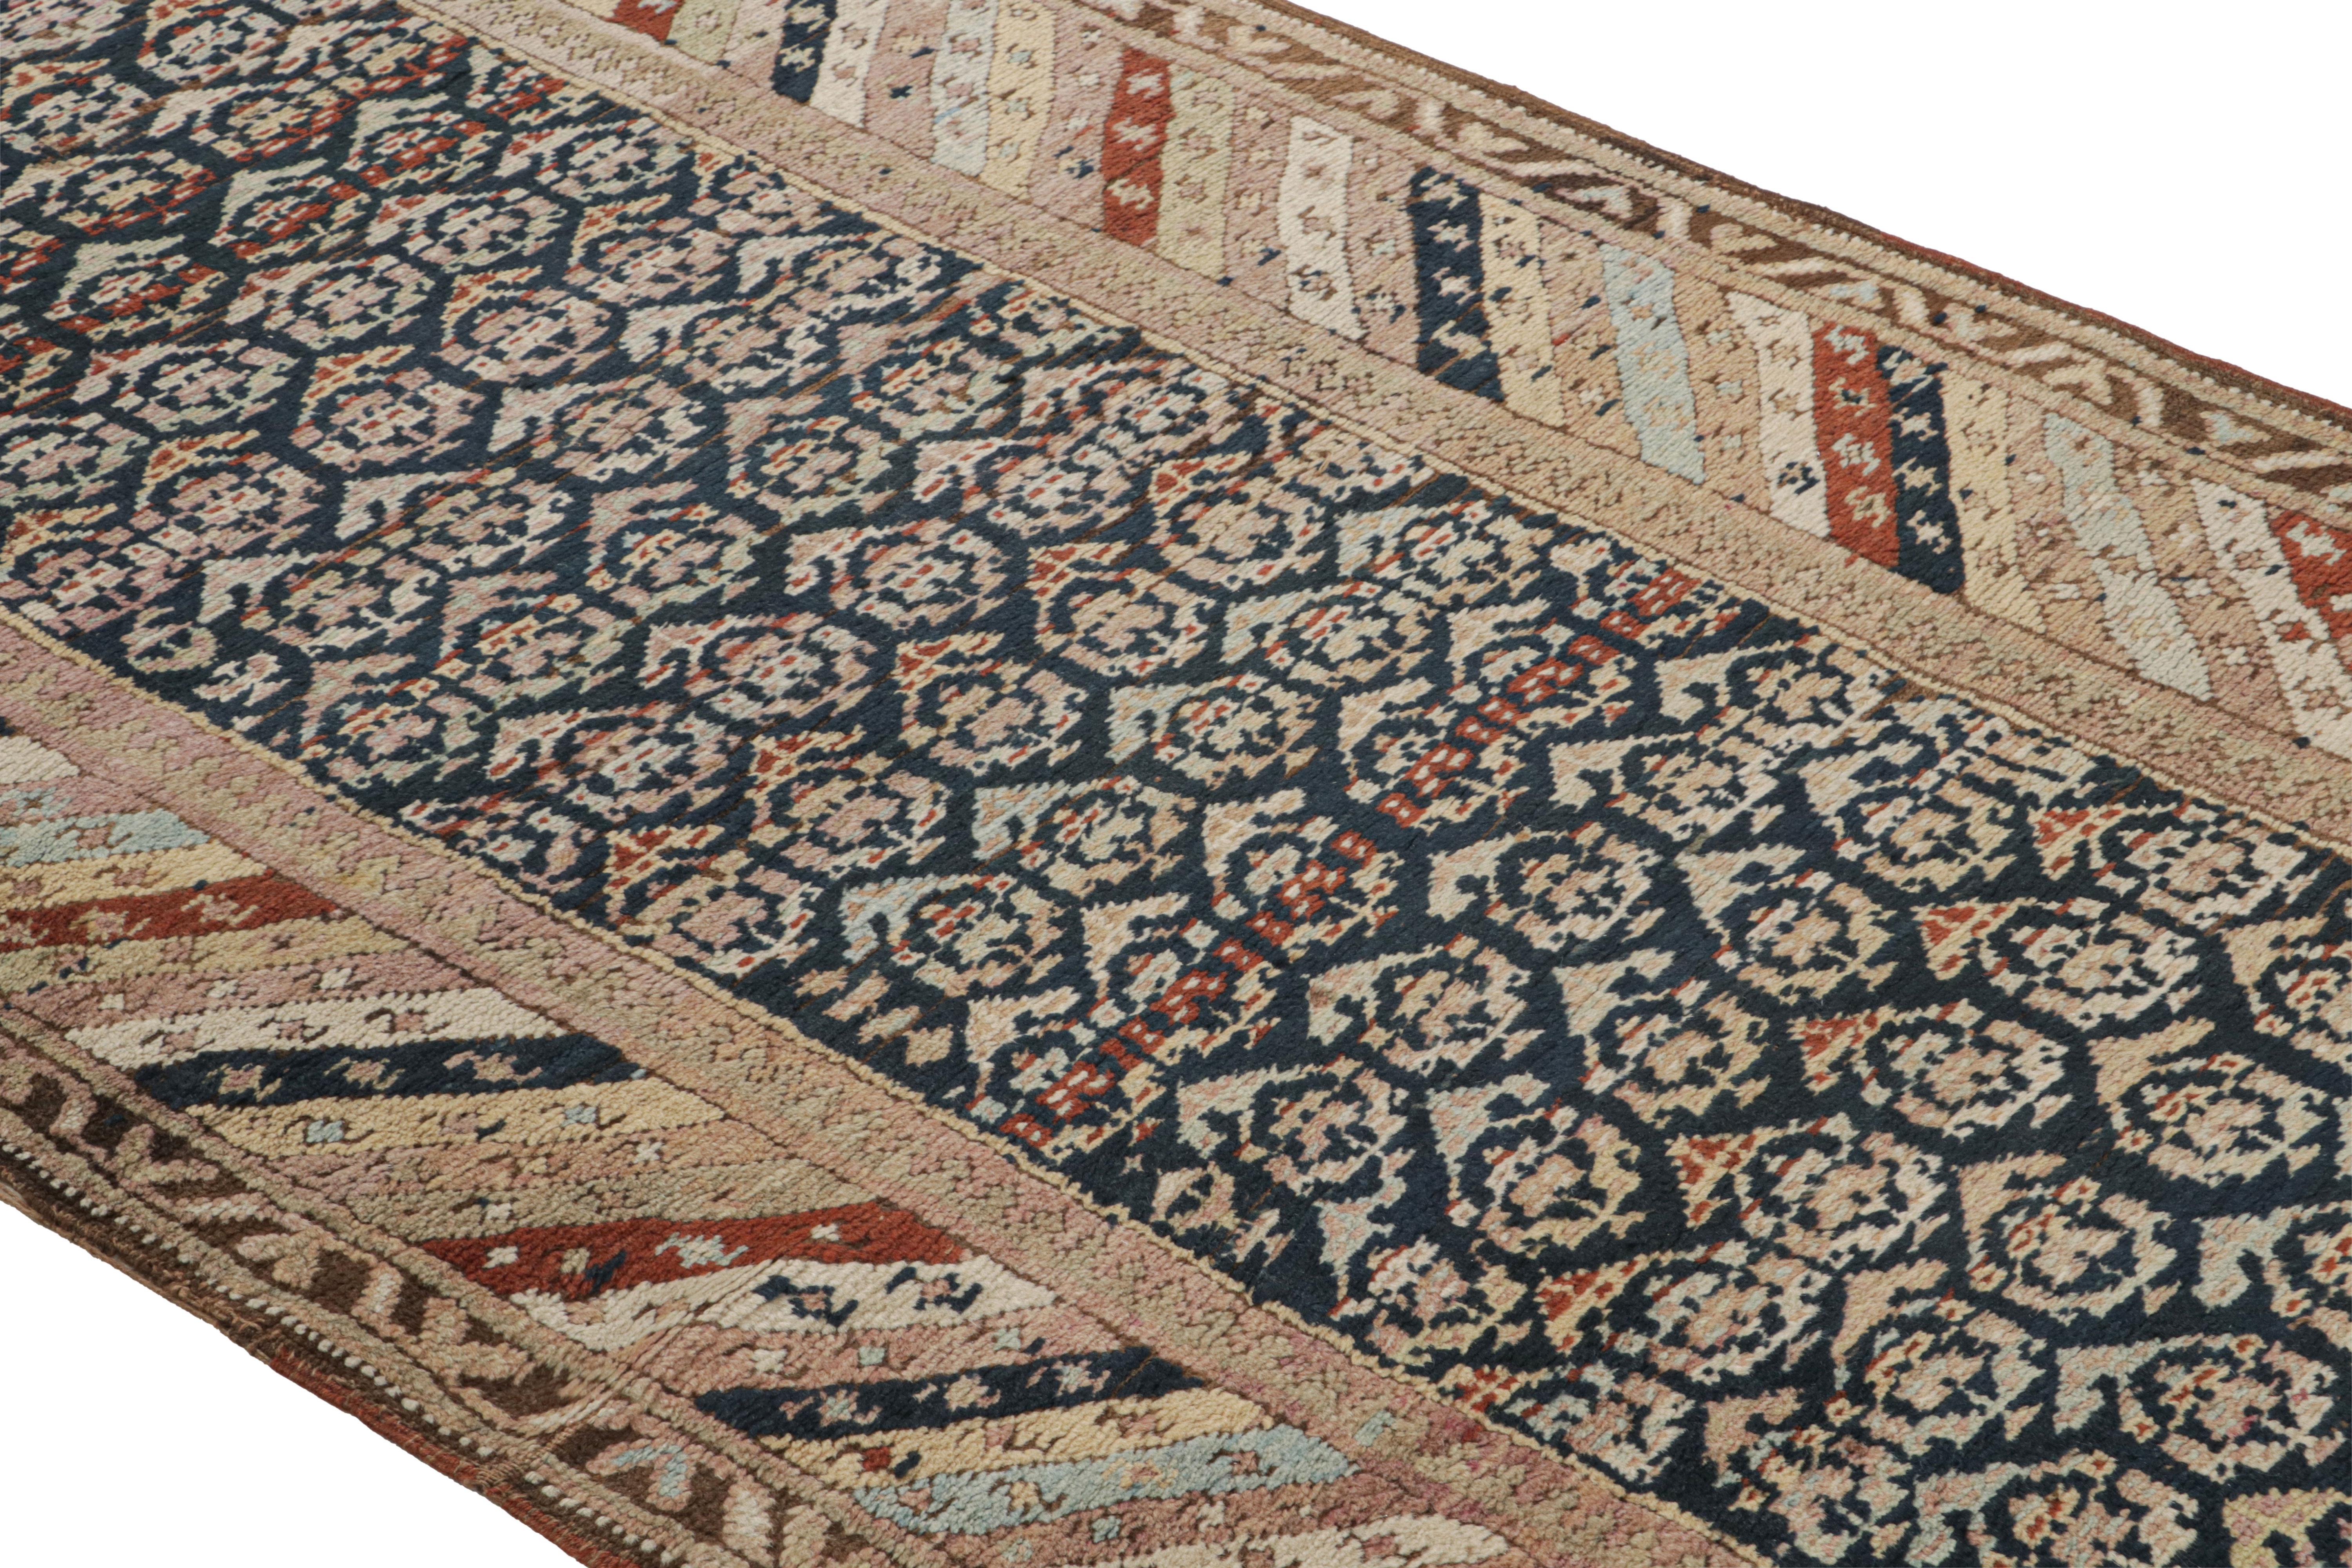 Hand knotted in wool from India circa 1890-1900, this 19th century antique runners originates as a fragment/border of a classic 19th century Agra rug, idyllic of the regal and intricate nature of this celebrated carpet family. Connoisseurs will note